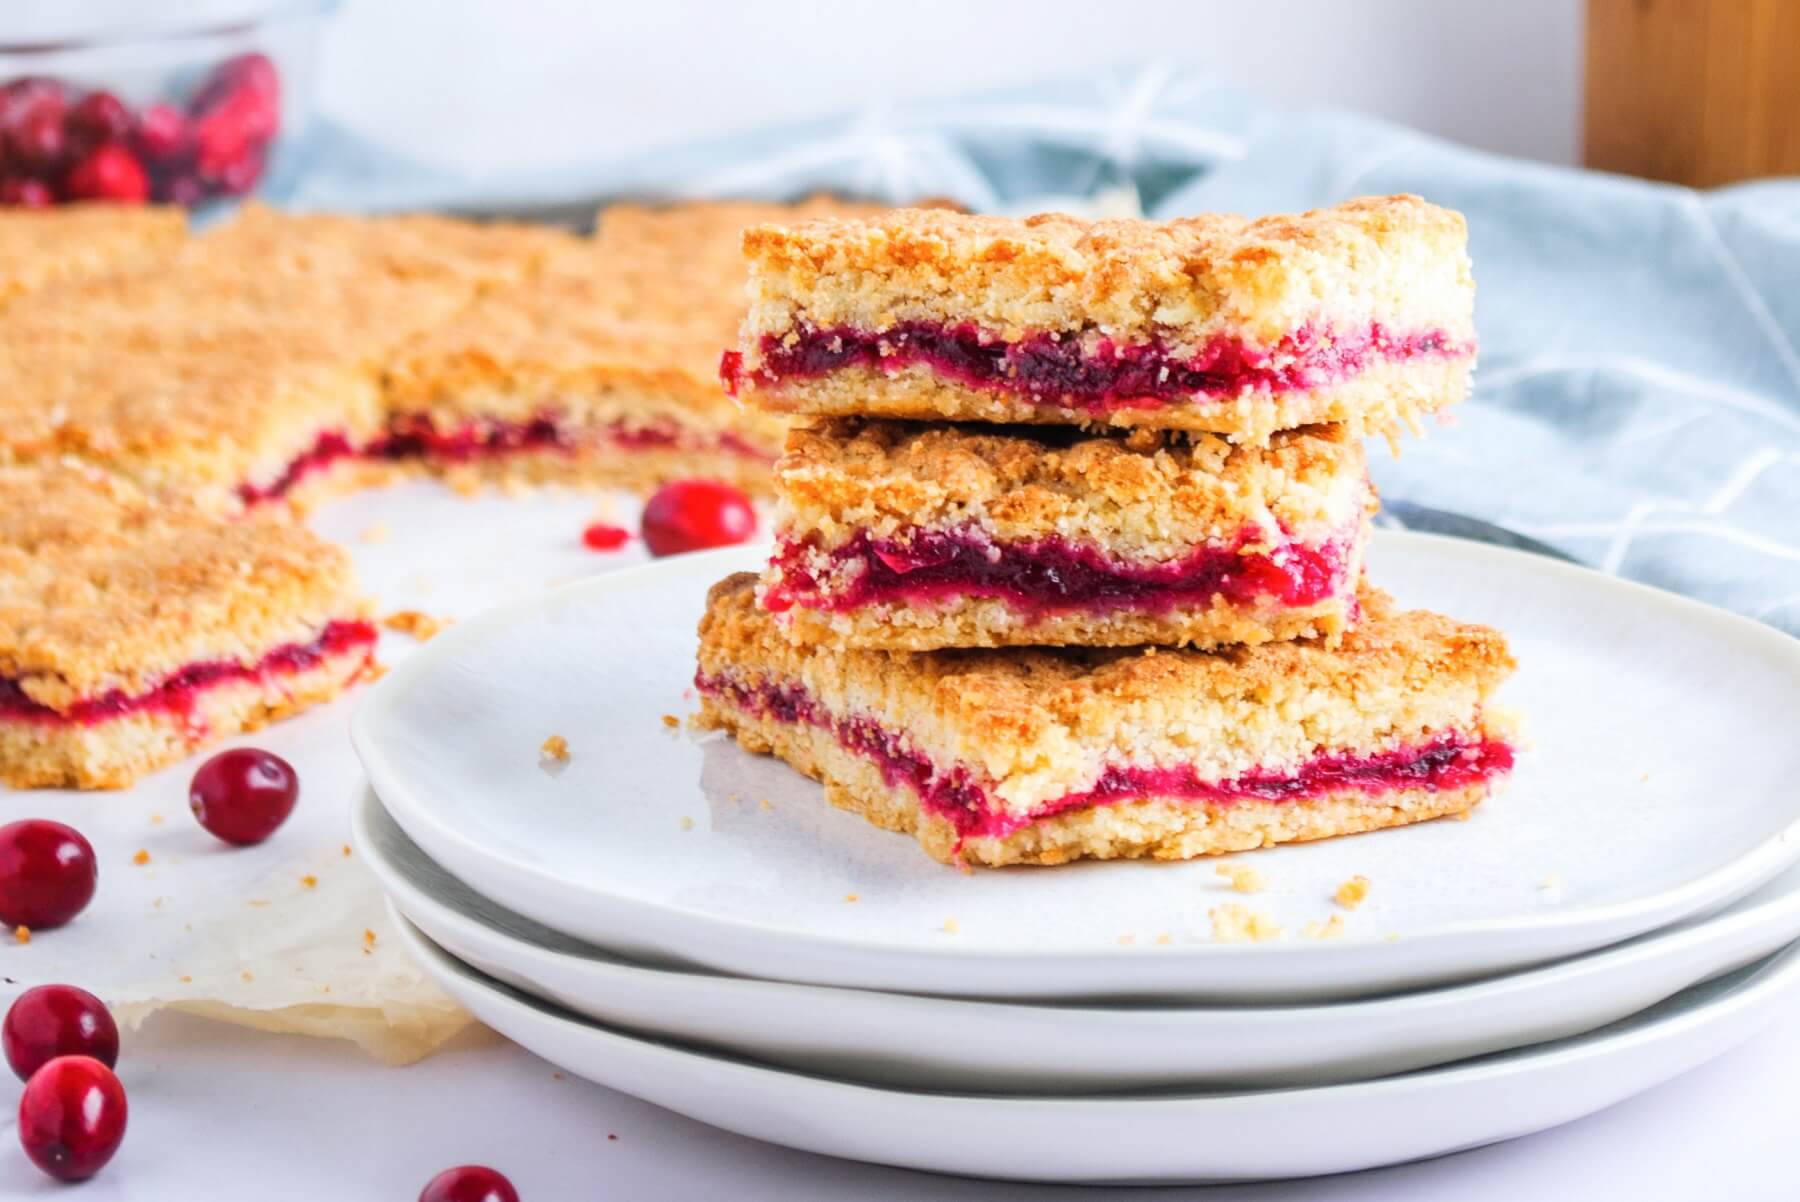 A stack of baked layered Cranberry Bars on a white plate.